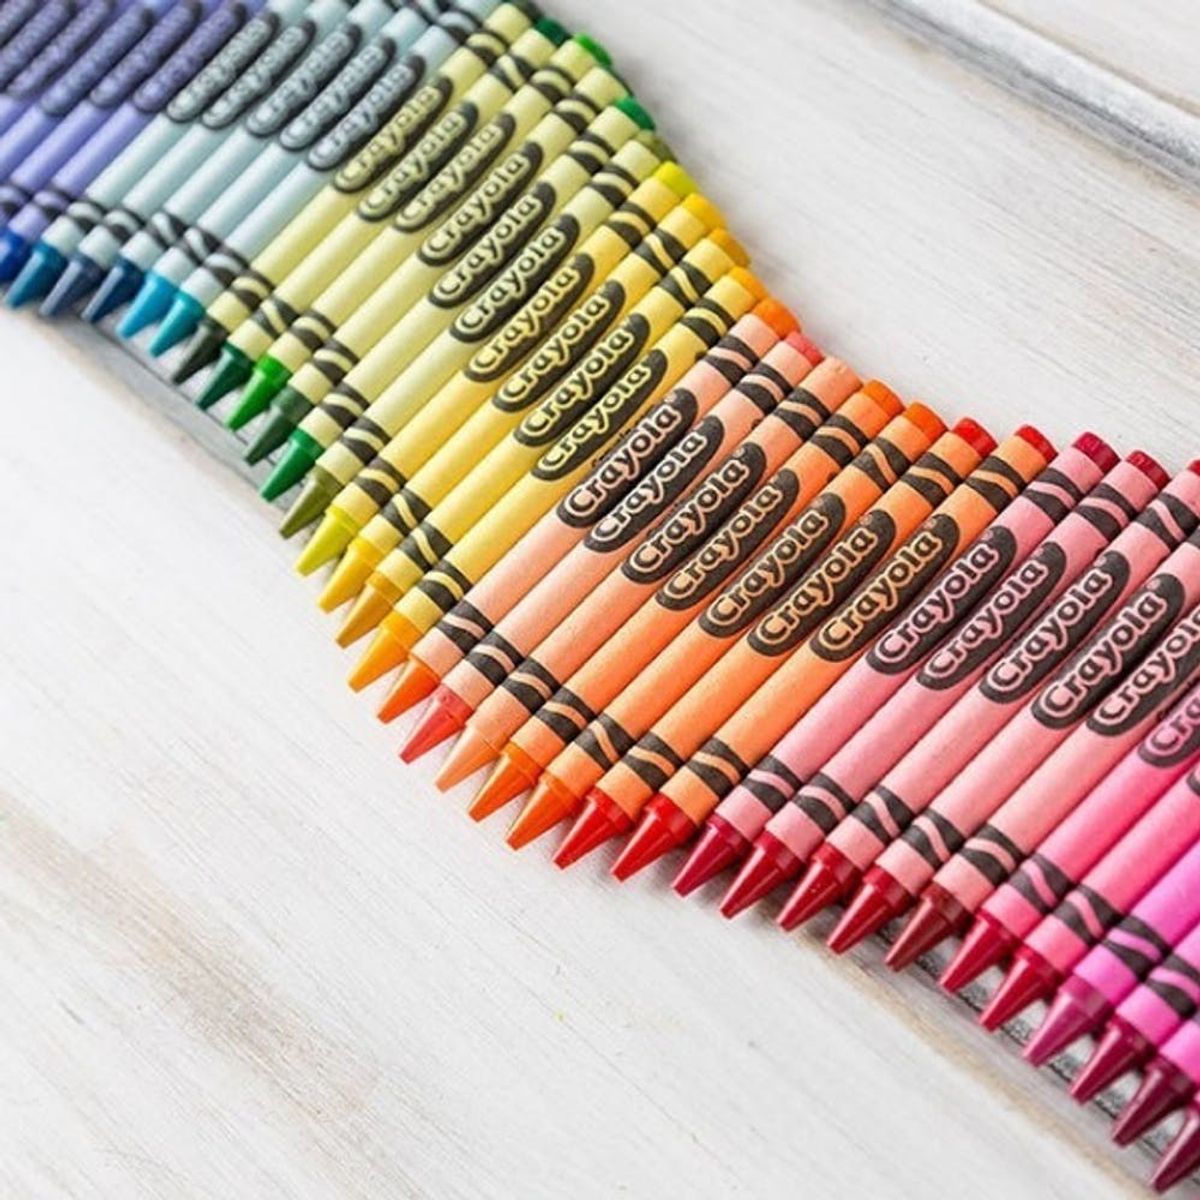 Crayola Revealed Which of Its Classic Colors Is Getting the Axe